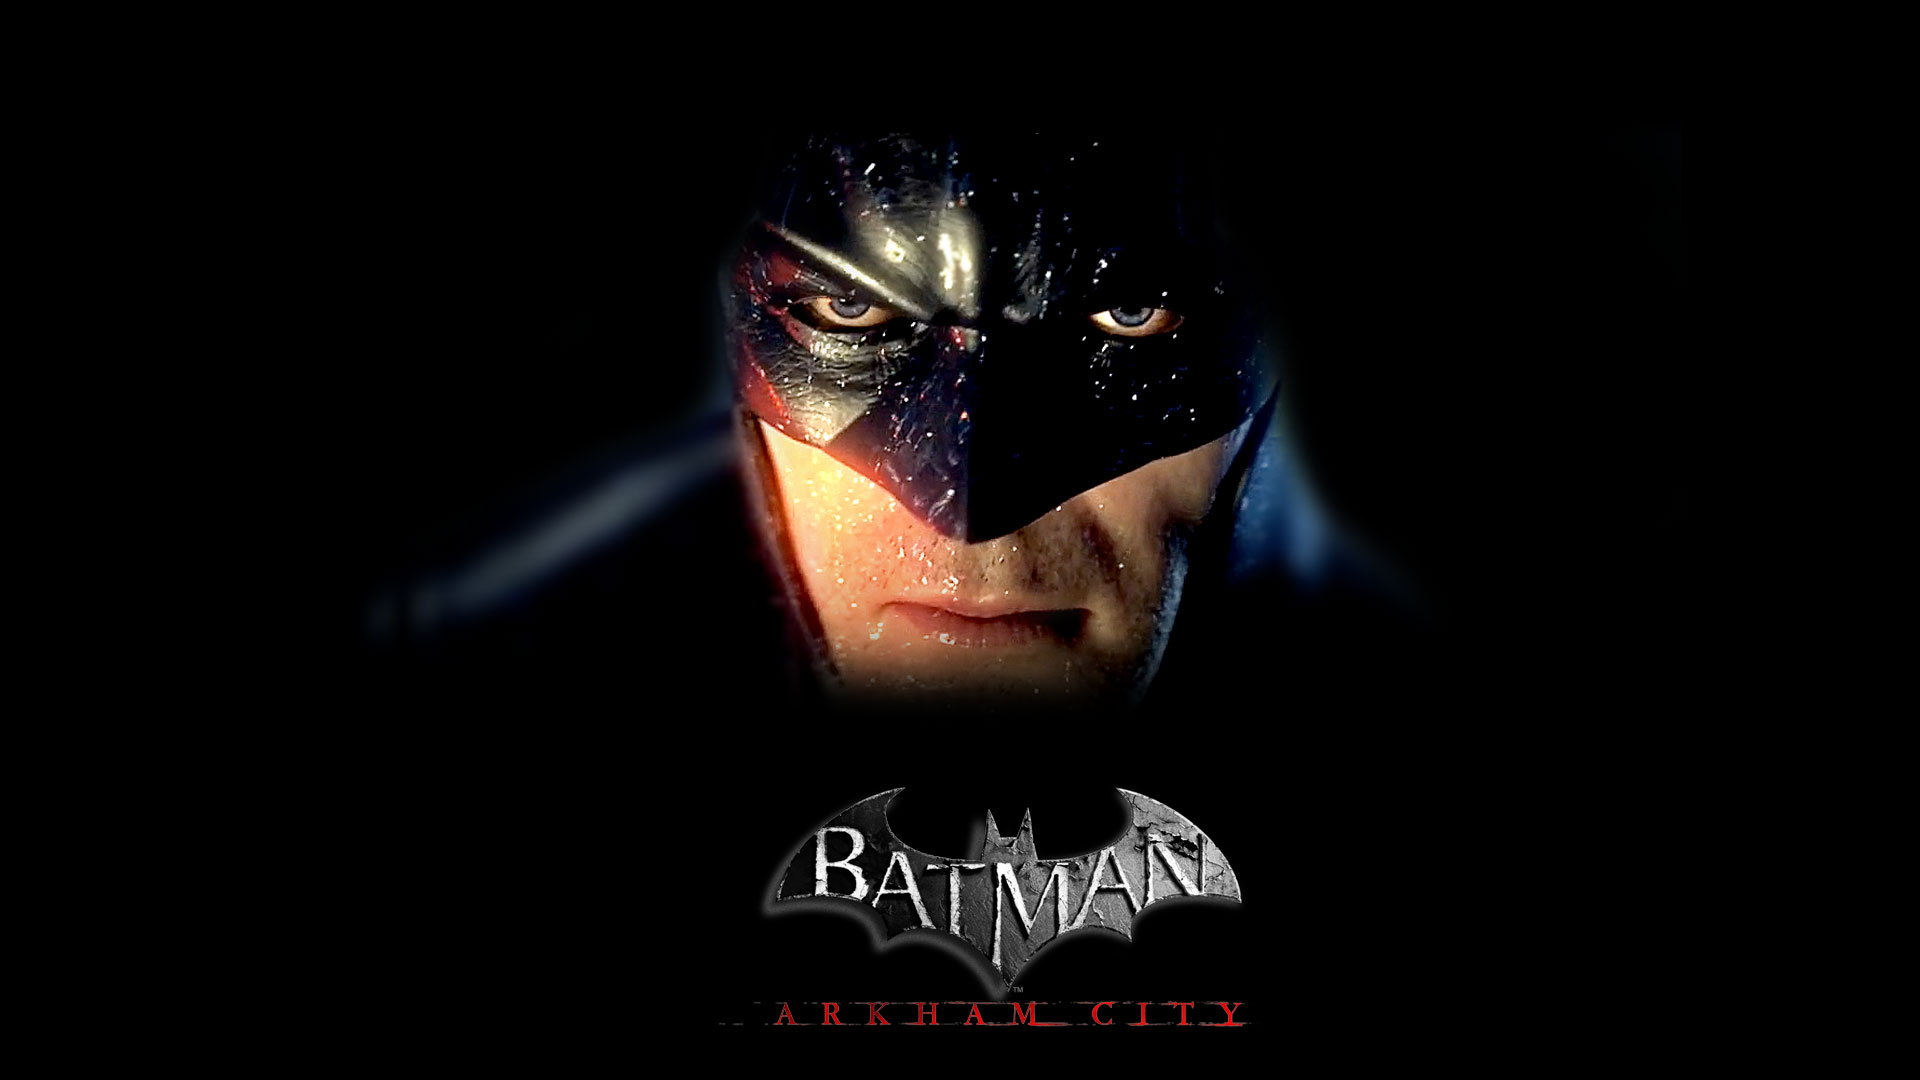 Batman Arkham City Wallpapers in HD High Resolution Page 3